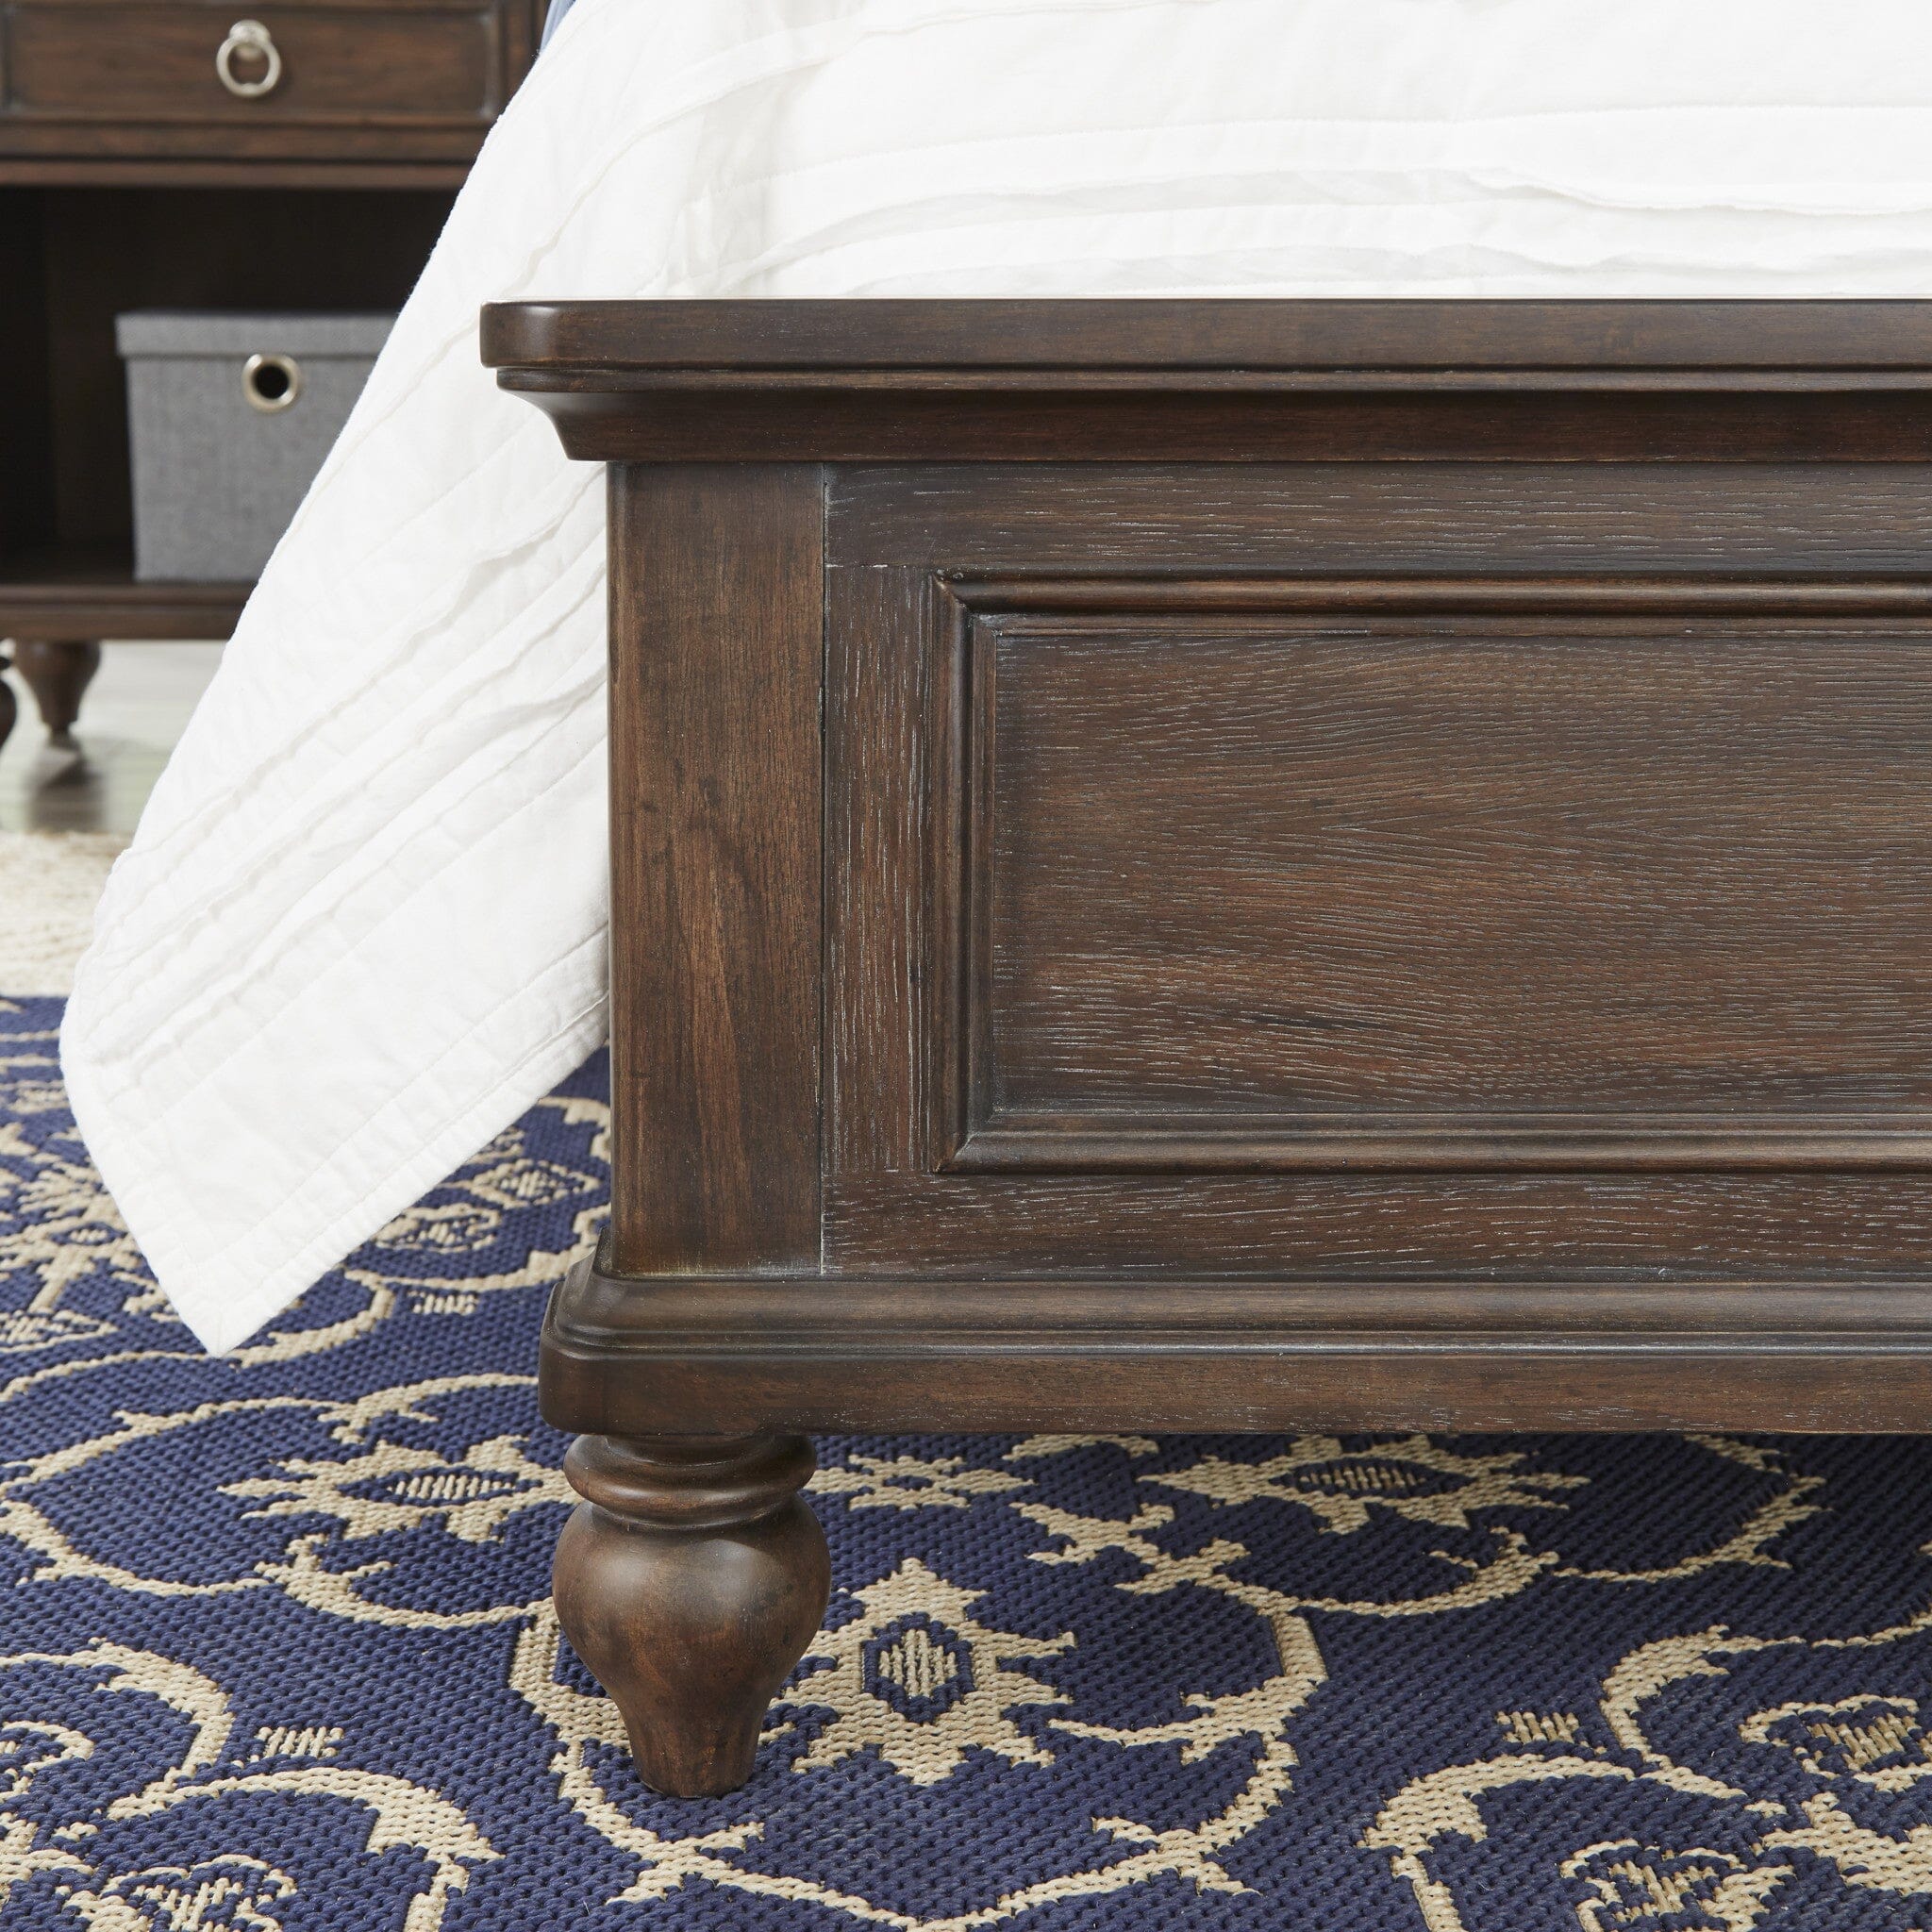 Coastal Queen Bed, Nightstand and Chest By Southport Queen Bedroom Set Southport